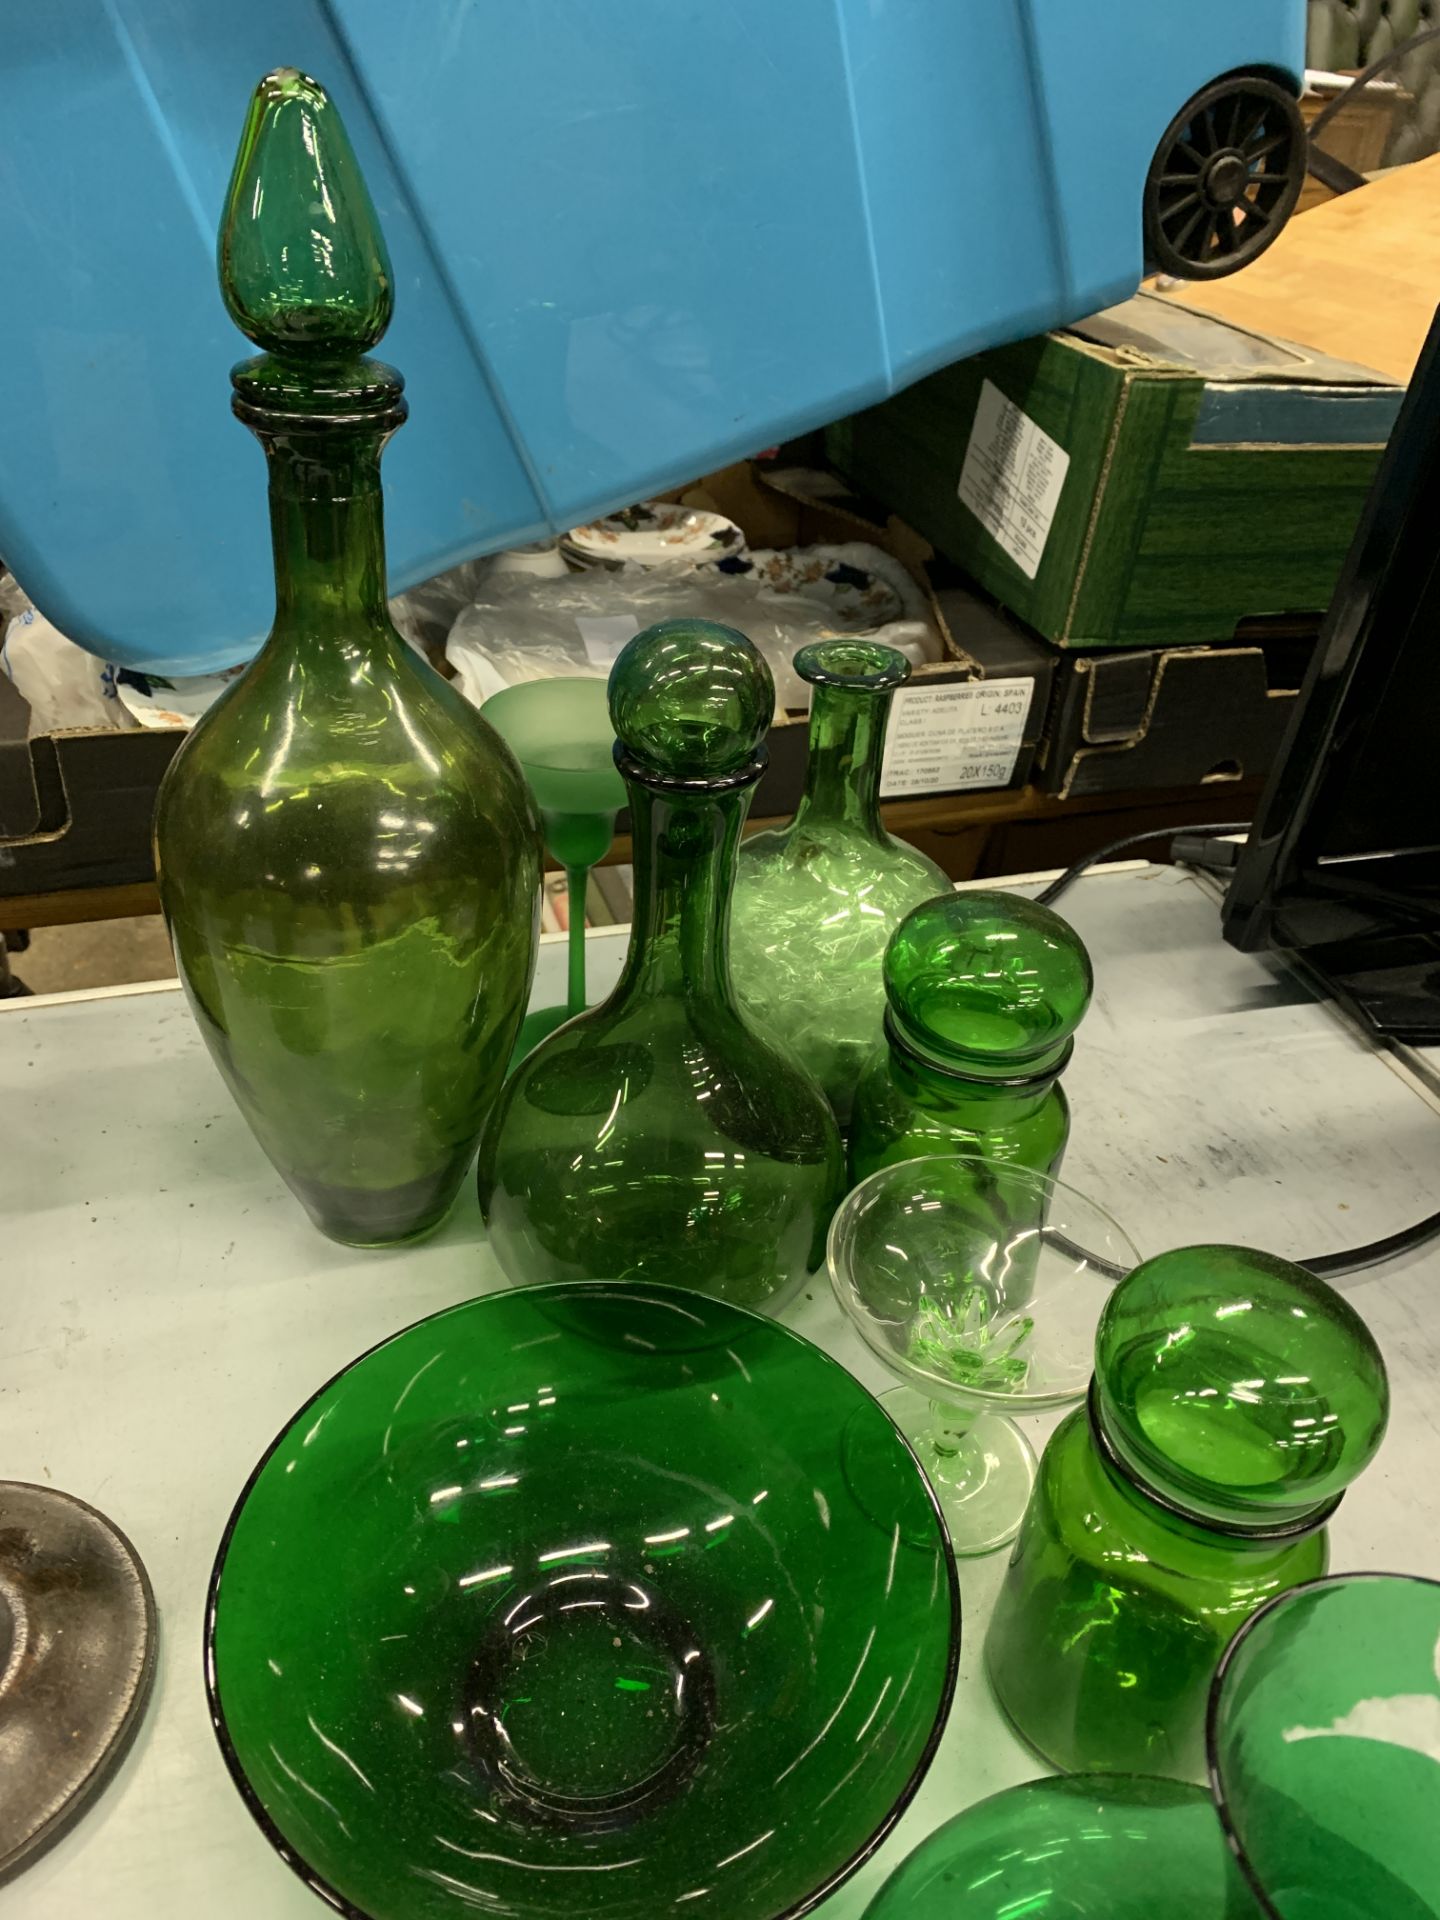 Quantity decorative green glass ware including two decanters. - Image 3 of 3